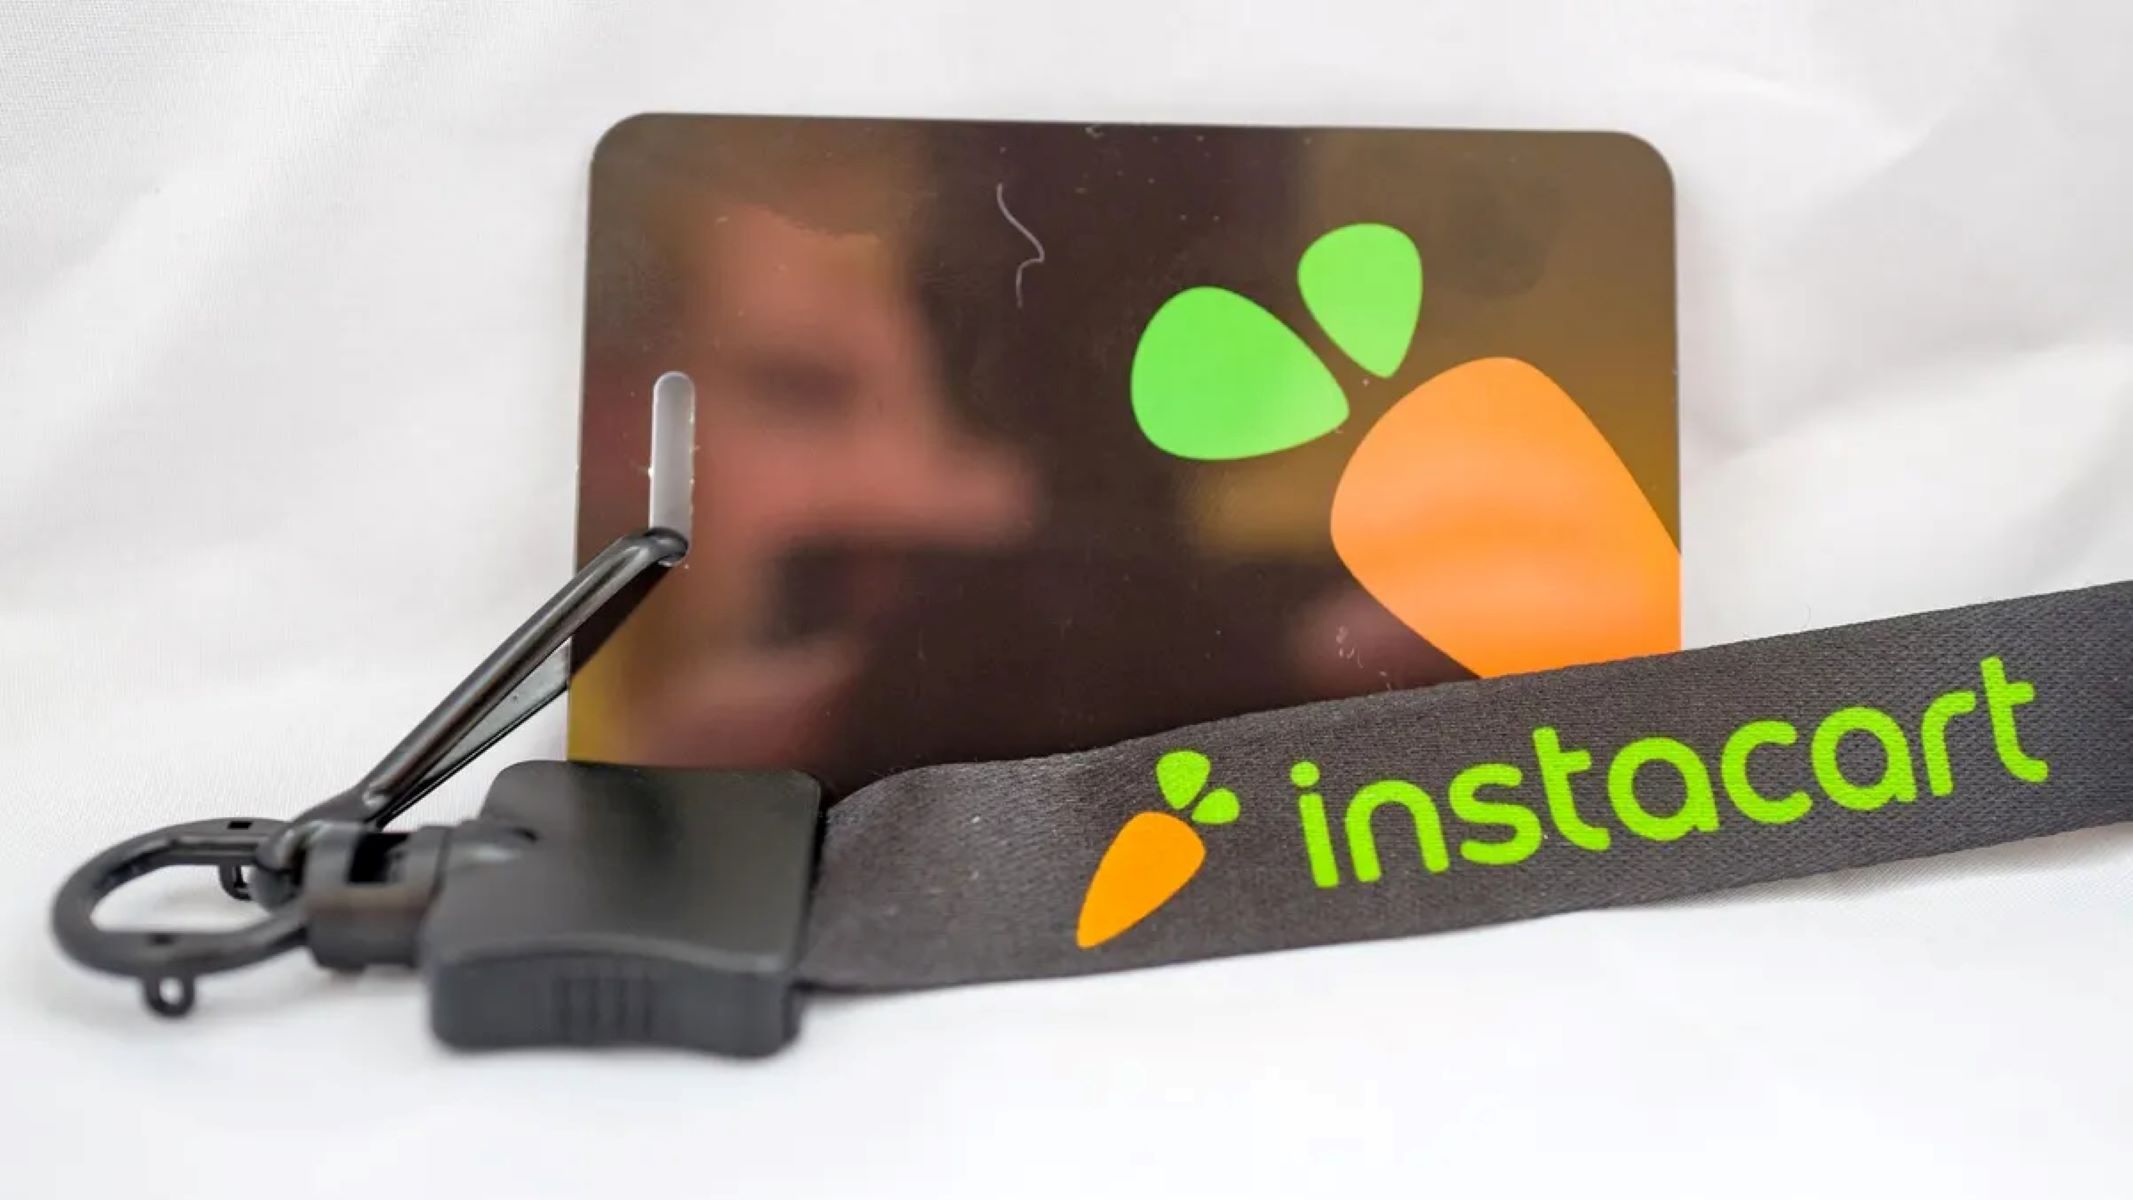 IPOs Making A Comeback: Instacart And Klaviyo File Form S-1s To Go Public